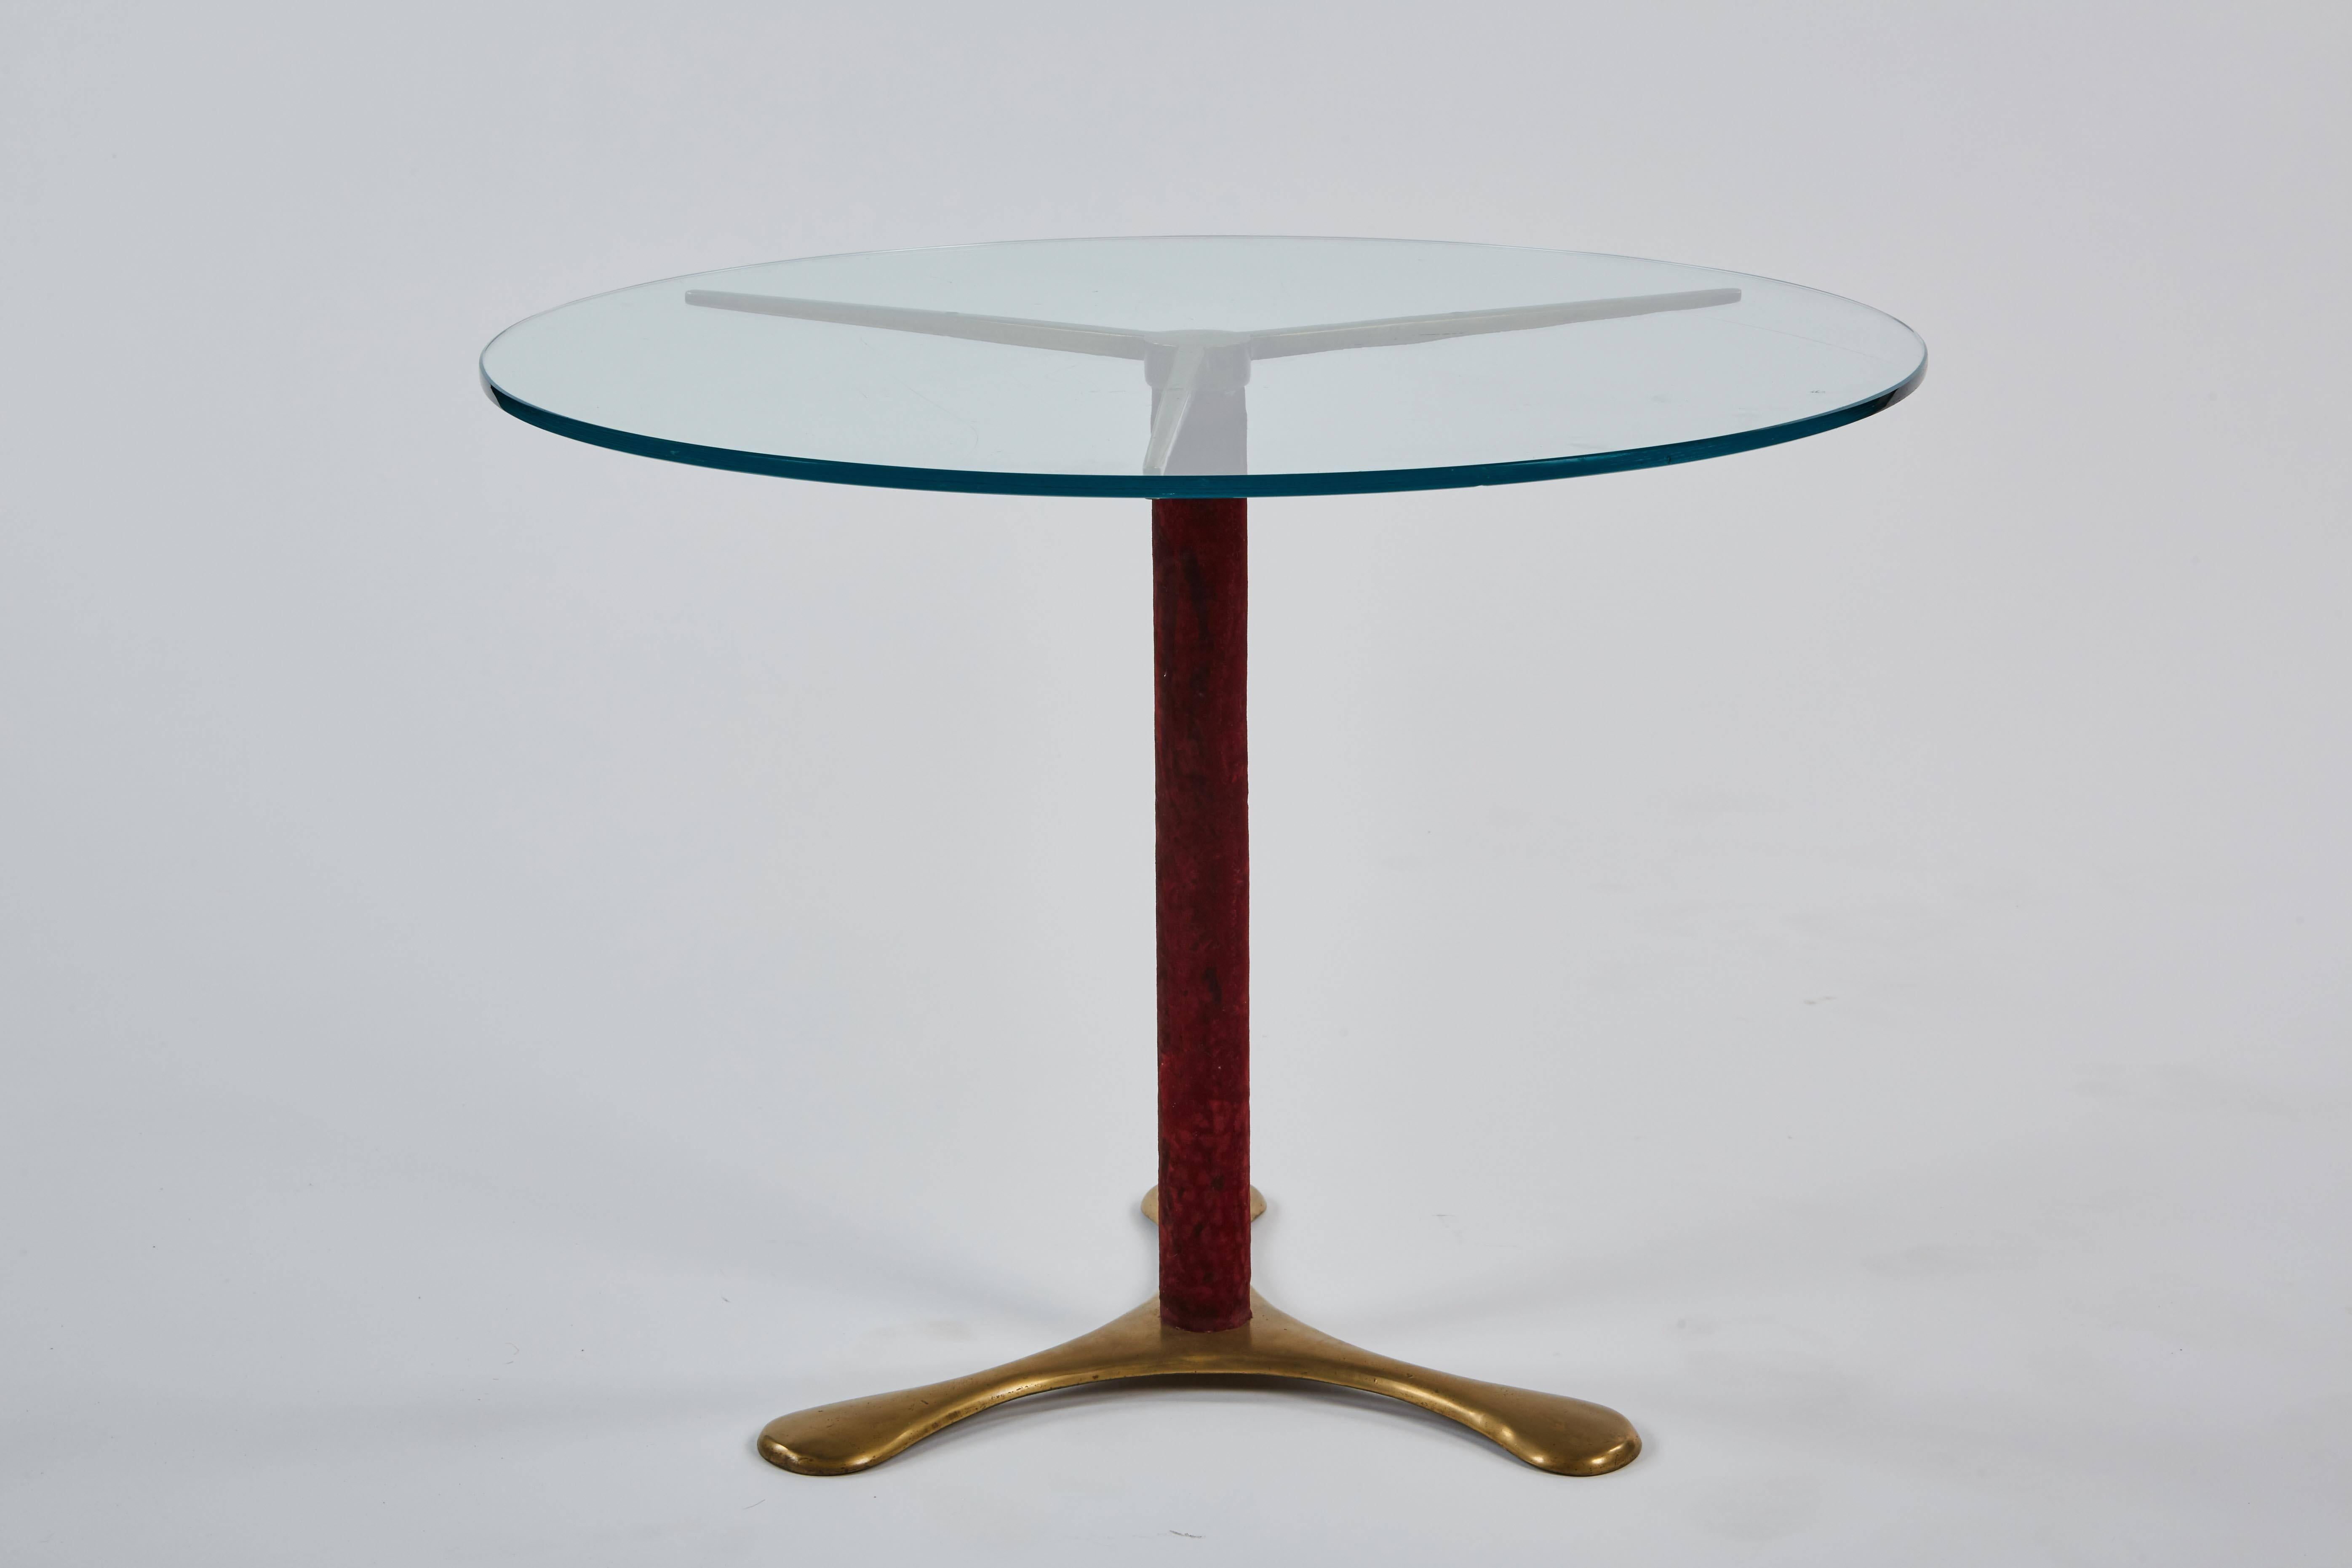 A delicate circular side table by Paolo Buffa, its glass top resting on a base of brass with a central upright in burgundy velvet.